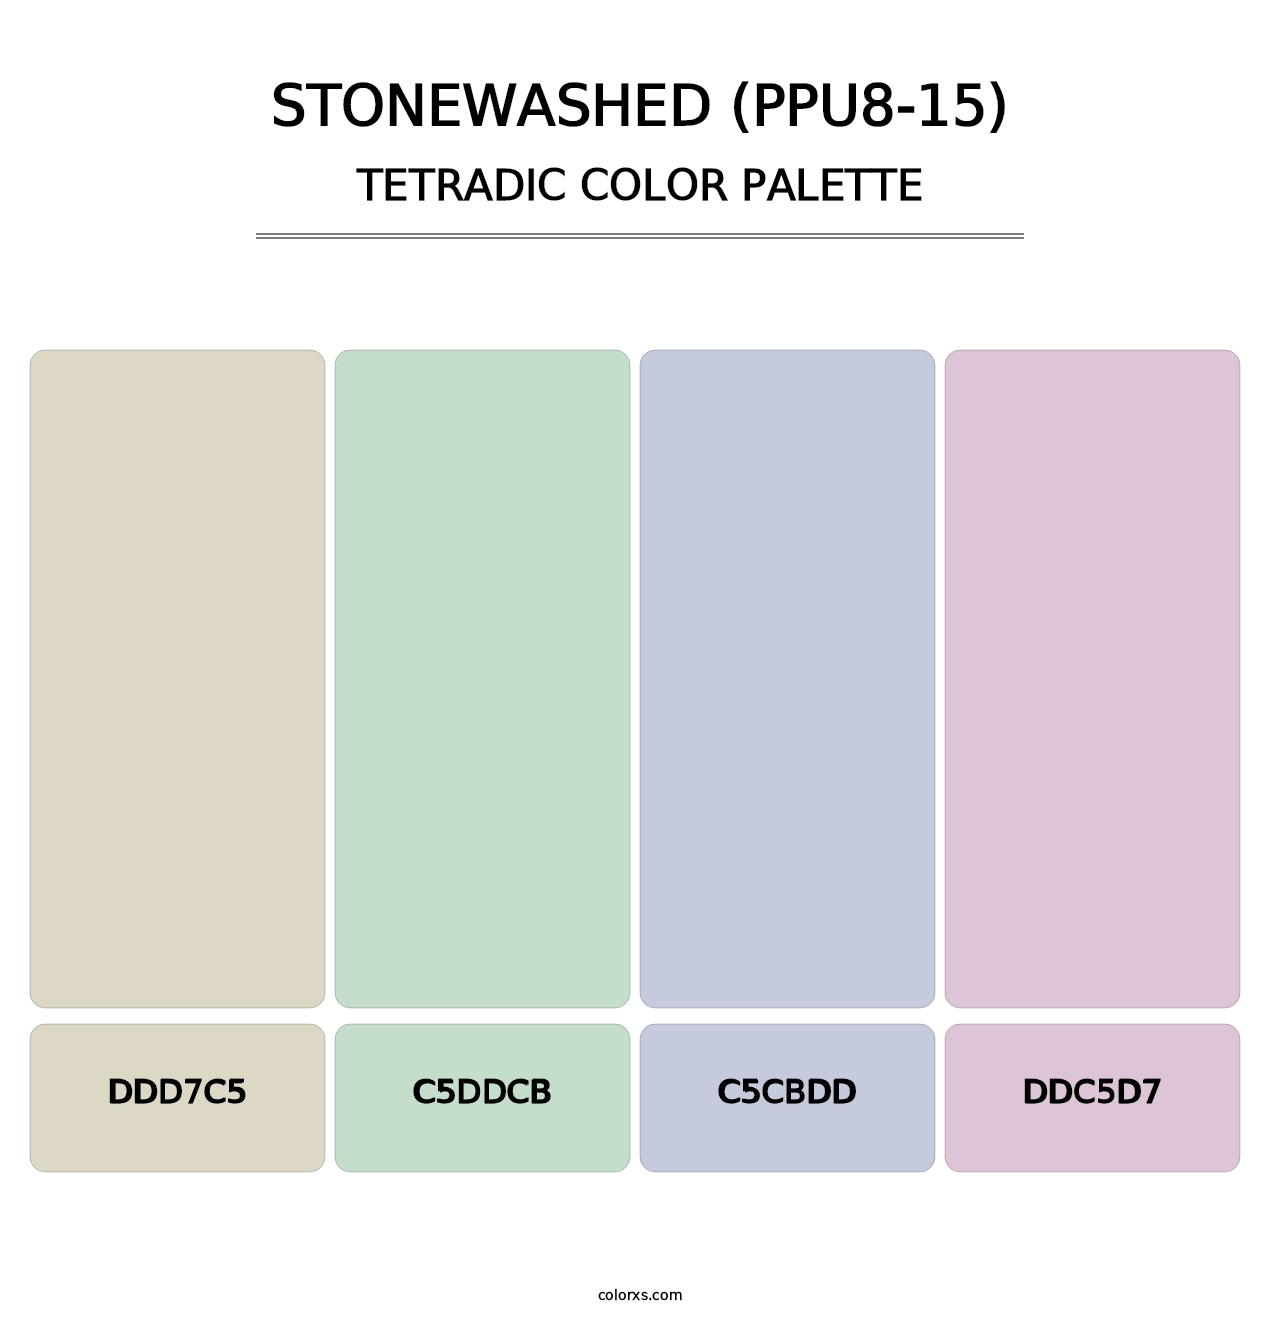 Stonewashed (PPU8-15) - Tetradic Color Palette